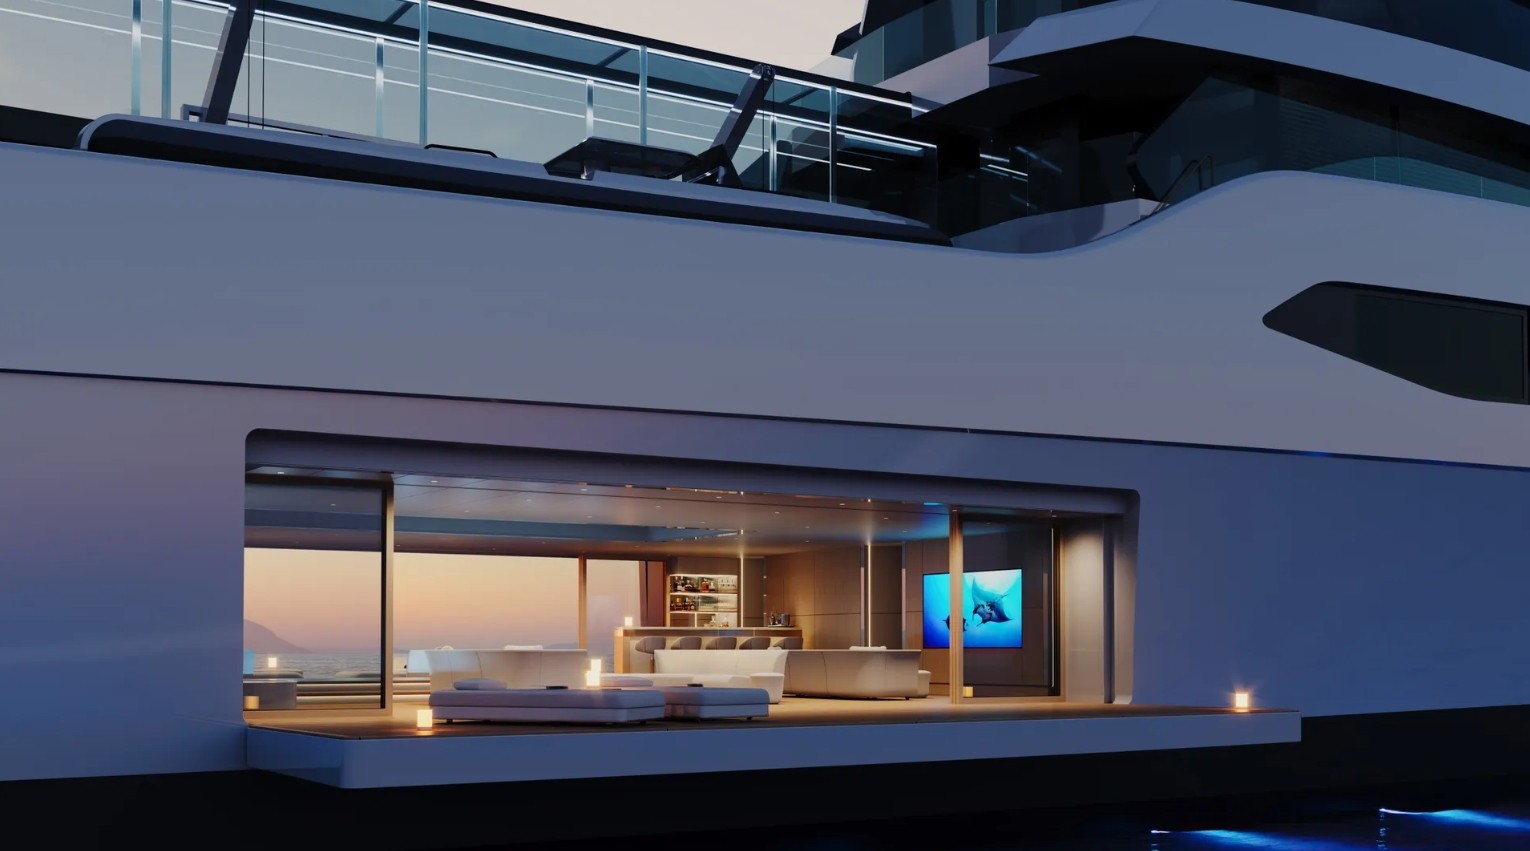 feadship unveils expv a 285 foot superyacht concept with a floating glass bridge 5